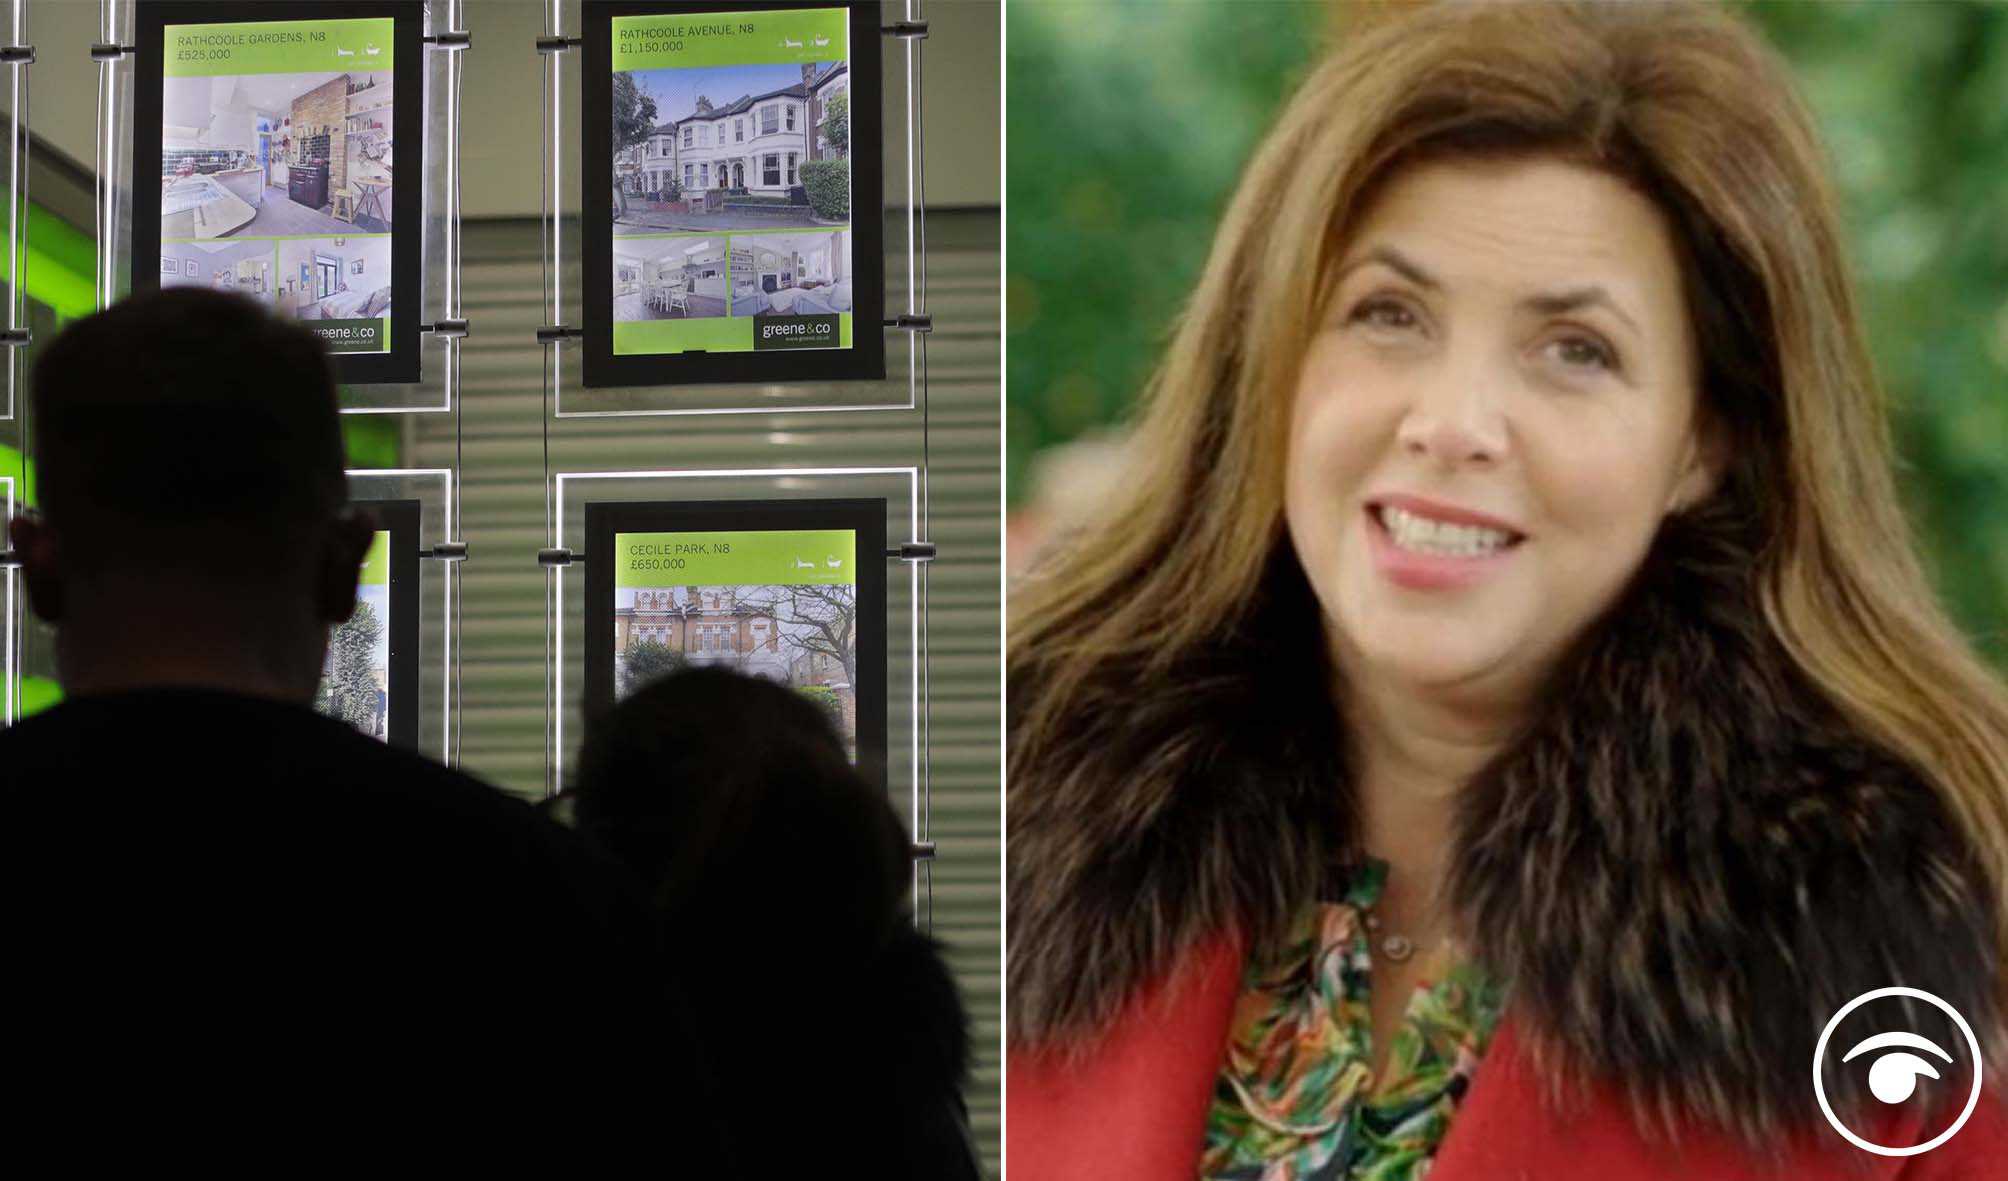 Kirstie Allsopp burns as folk show what properties they can afford after cancelling Netflix subscription